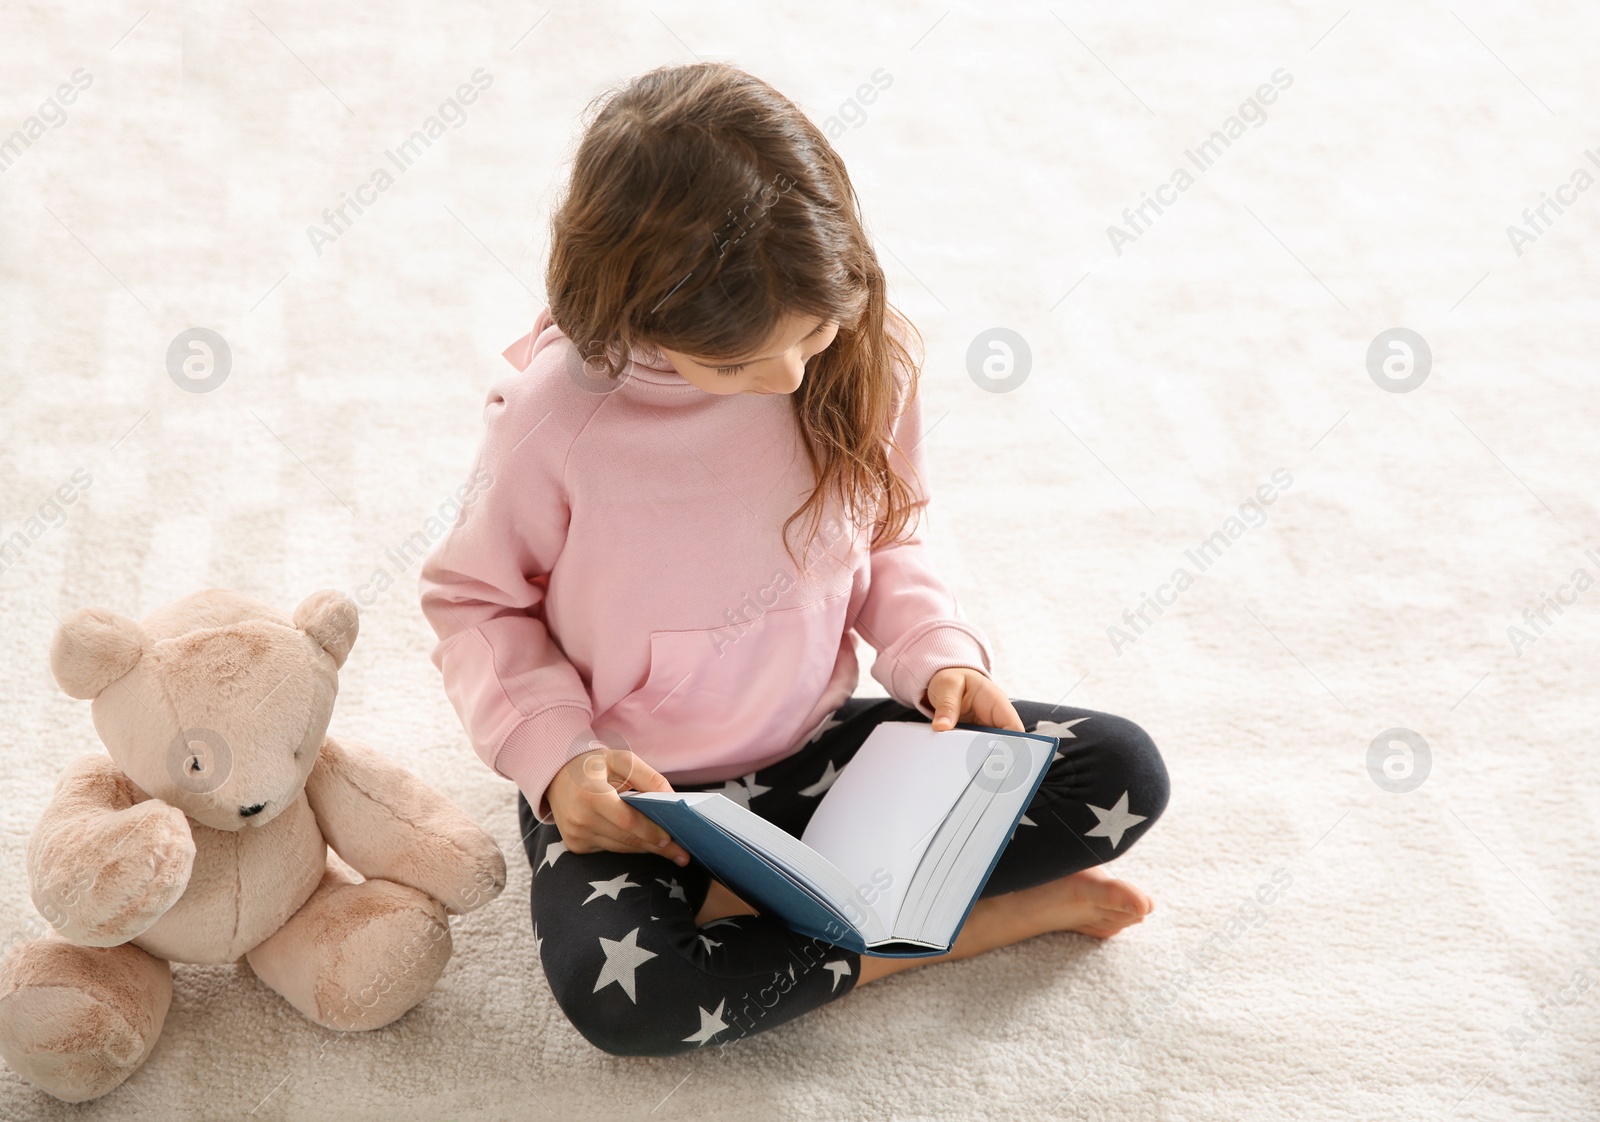 Photo of Cute little girl with teddy bear reading book on floor. Space for text